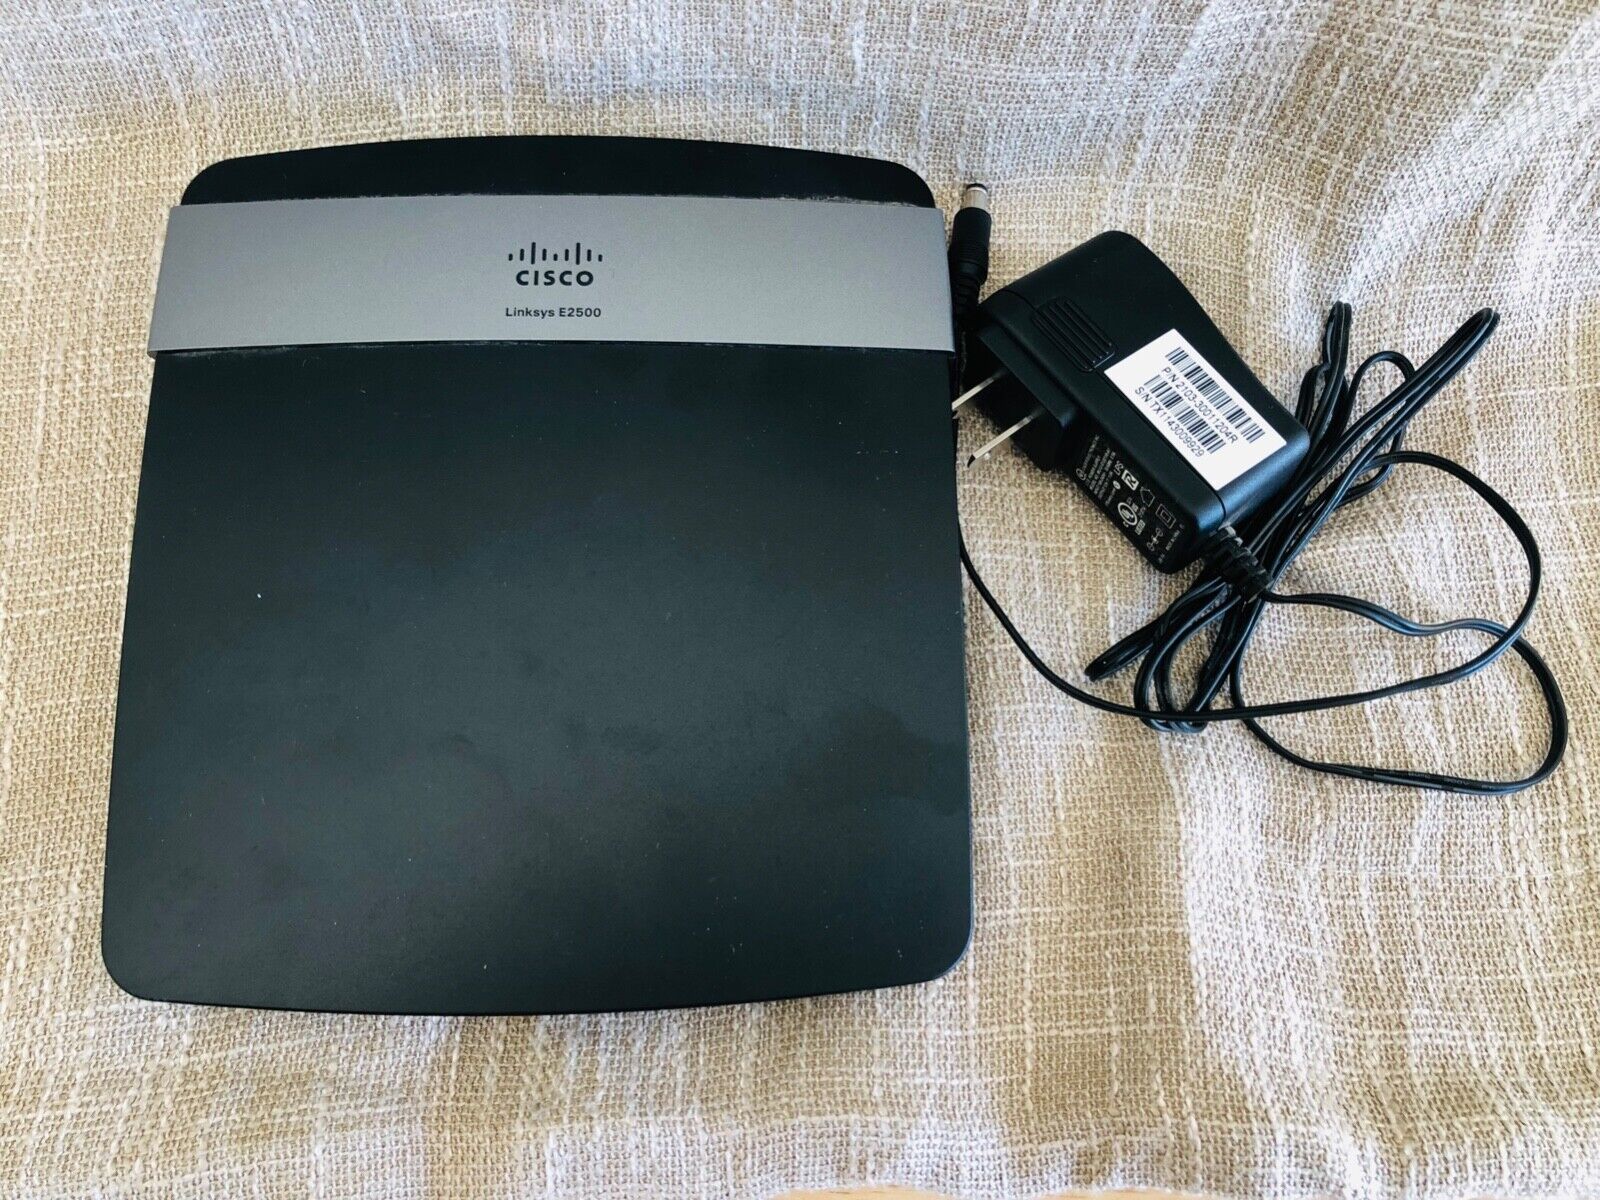 Cisco Linksys E2500 300 Mbps 4-Port 10/100 Wireless Router